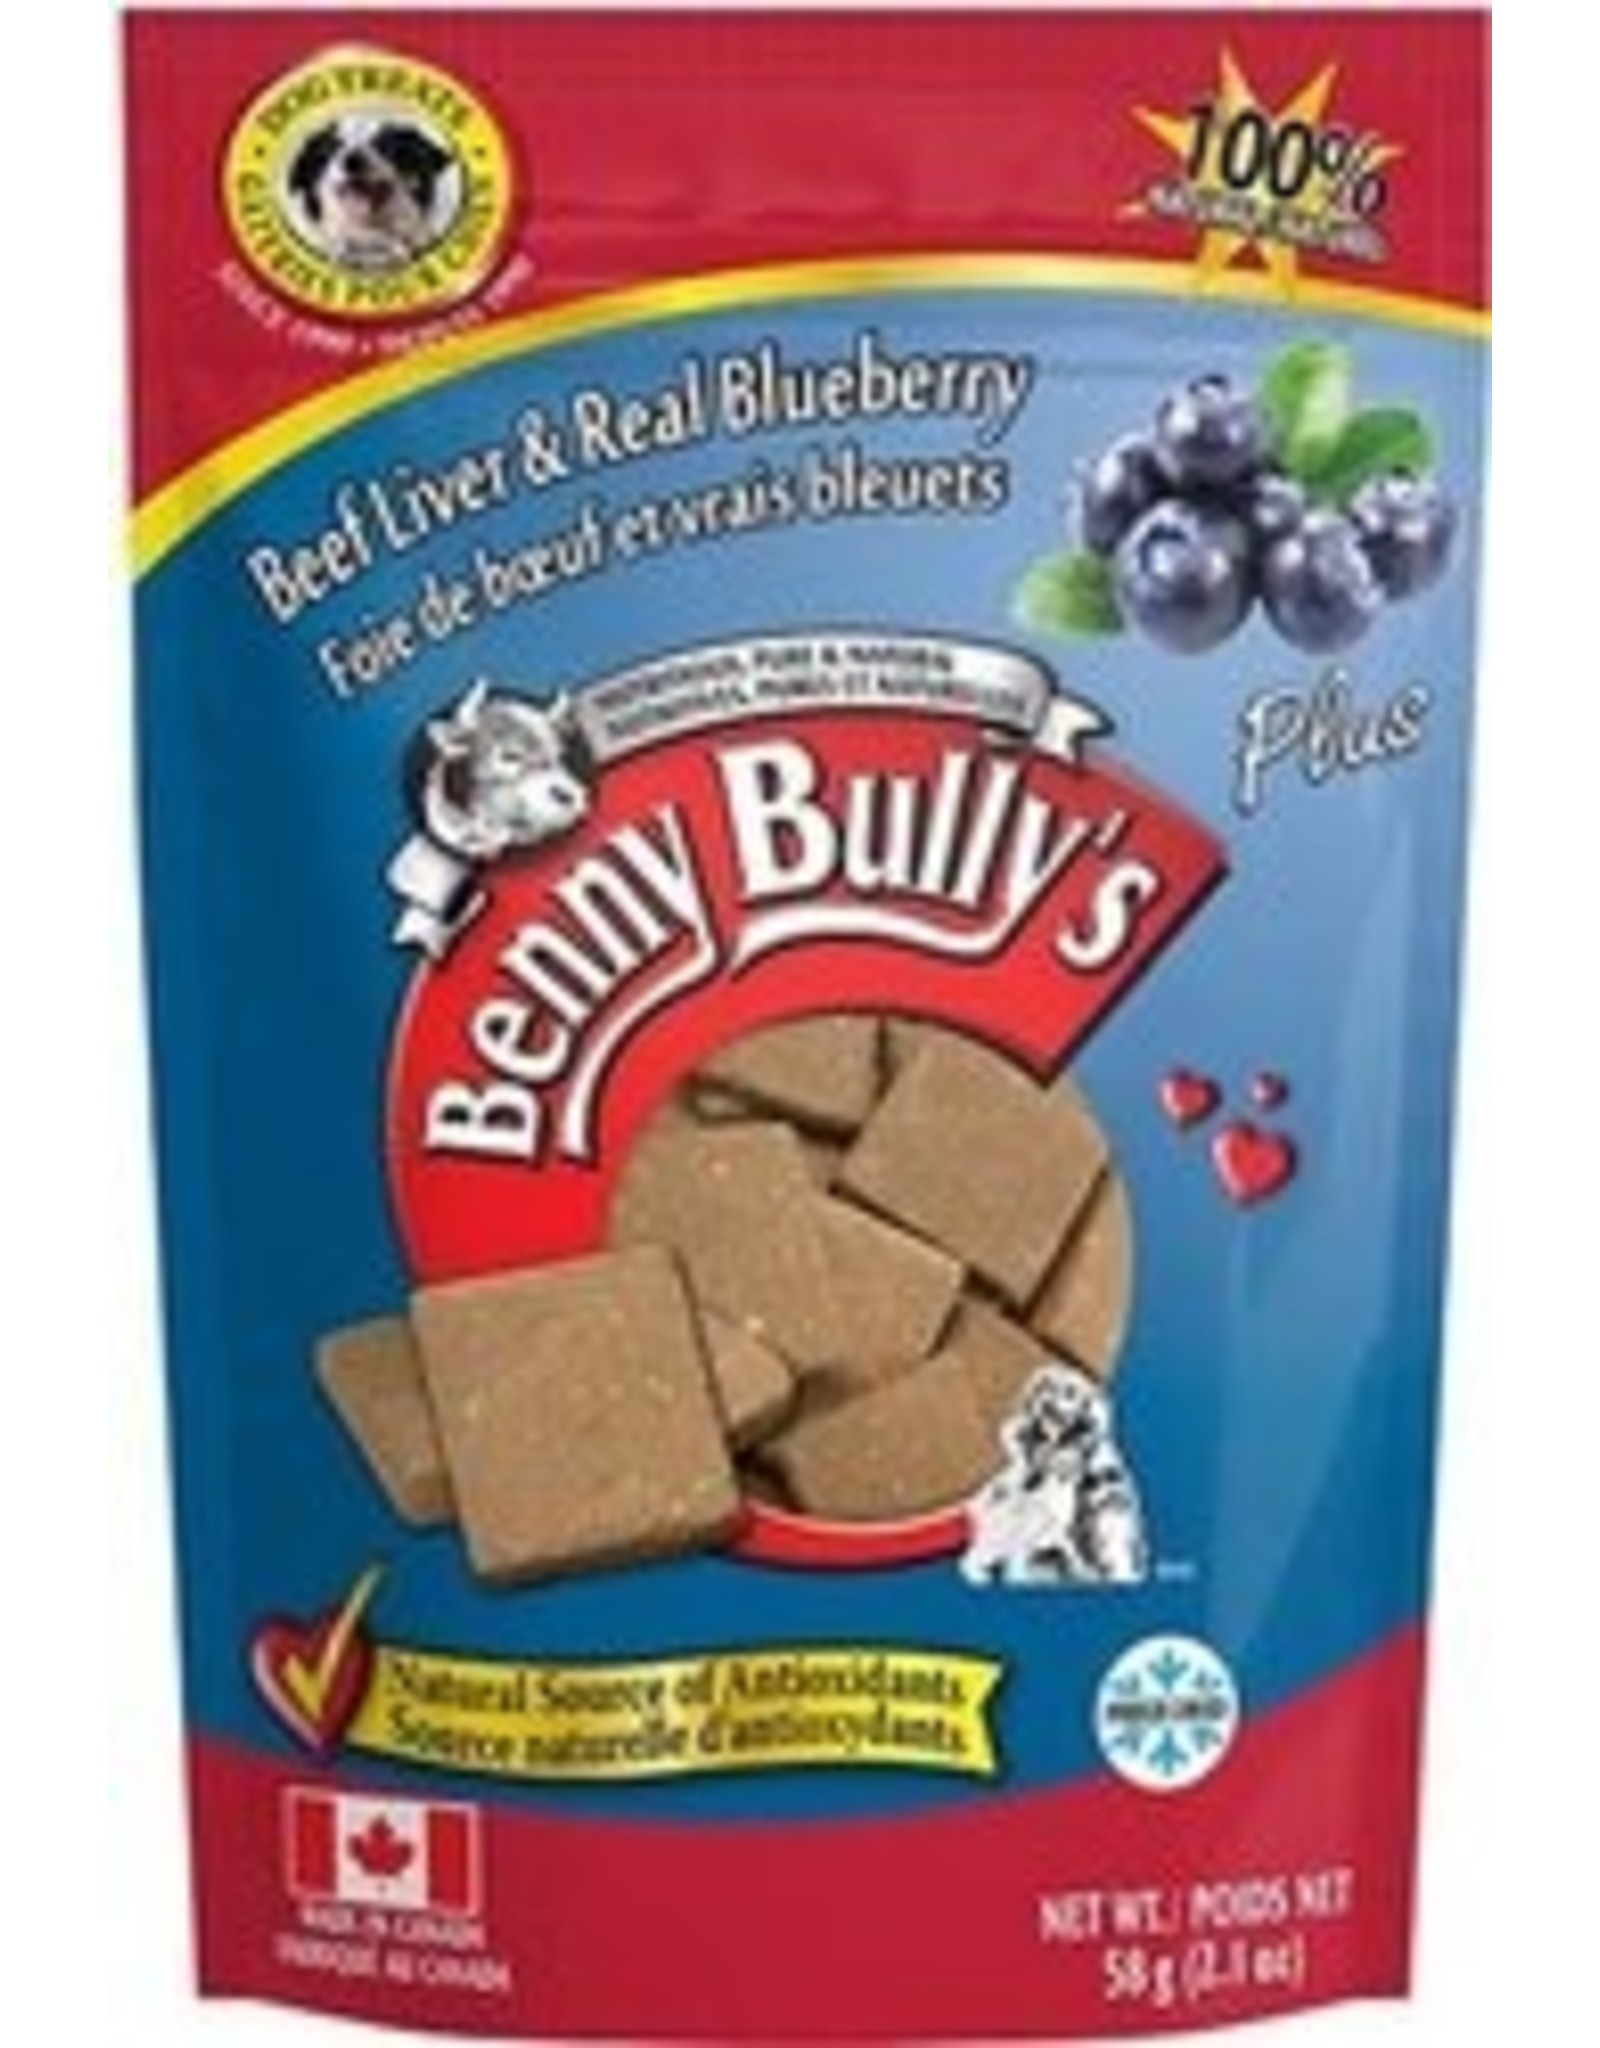 Benny Bully's Benny Bully’s - Beef Liver & Real Blueberry 58g